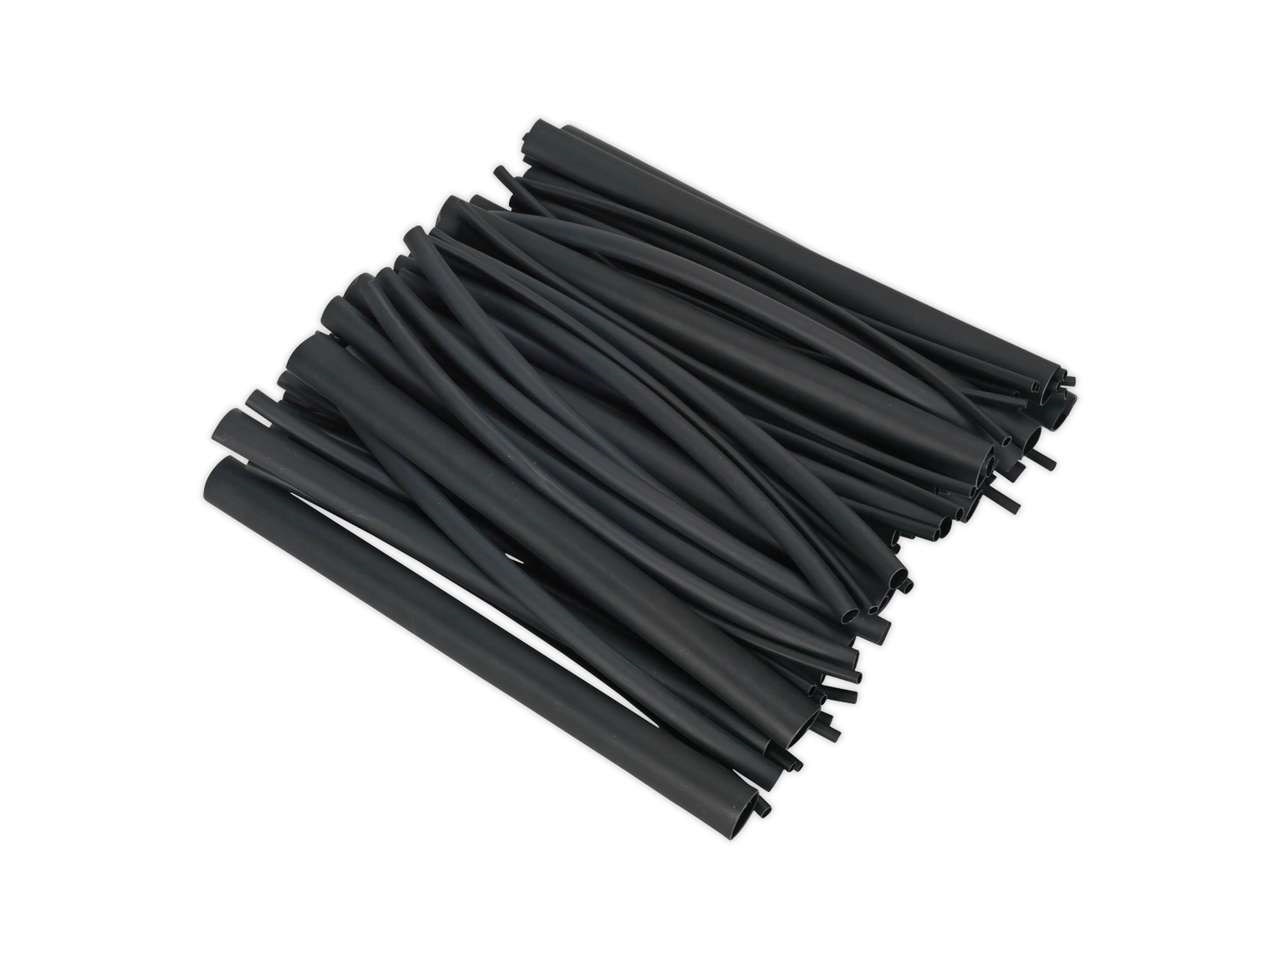 Sealey HSTAL72B Heat Shrink Tubing Assortment 72pc Black Adhesive Lined Heat Shrink Tubing Tractor Supply